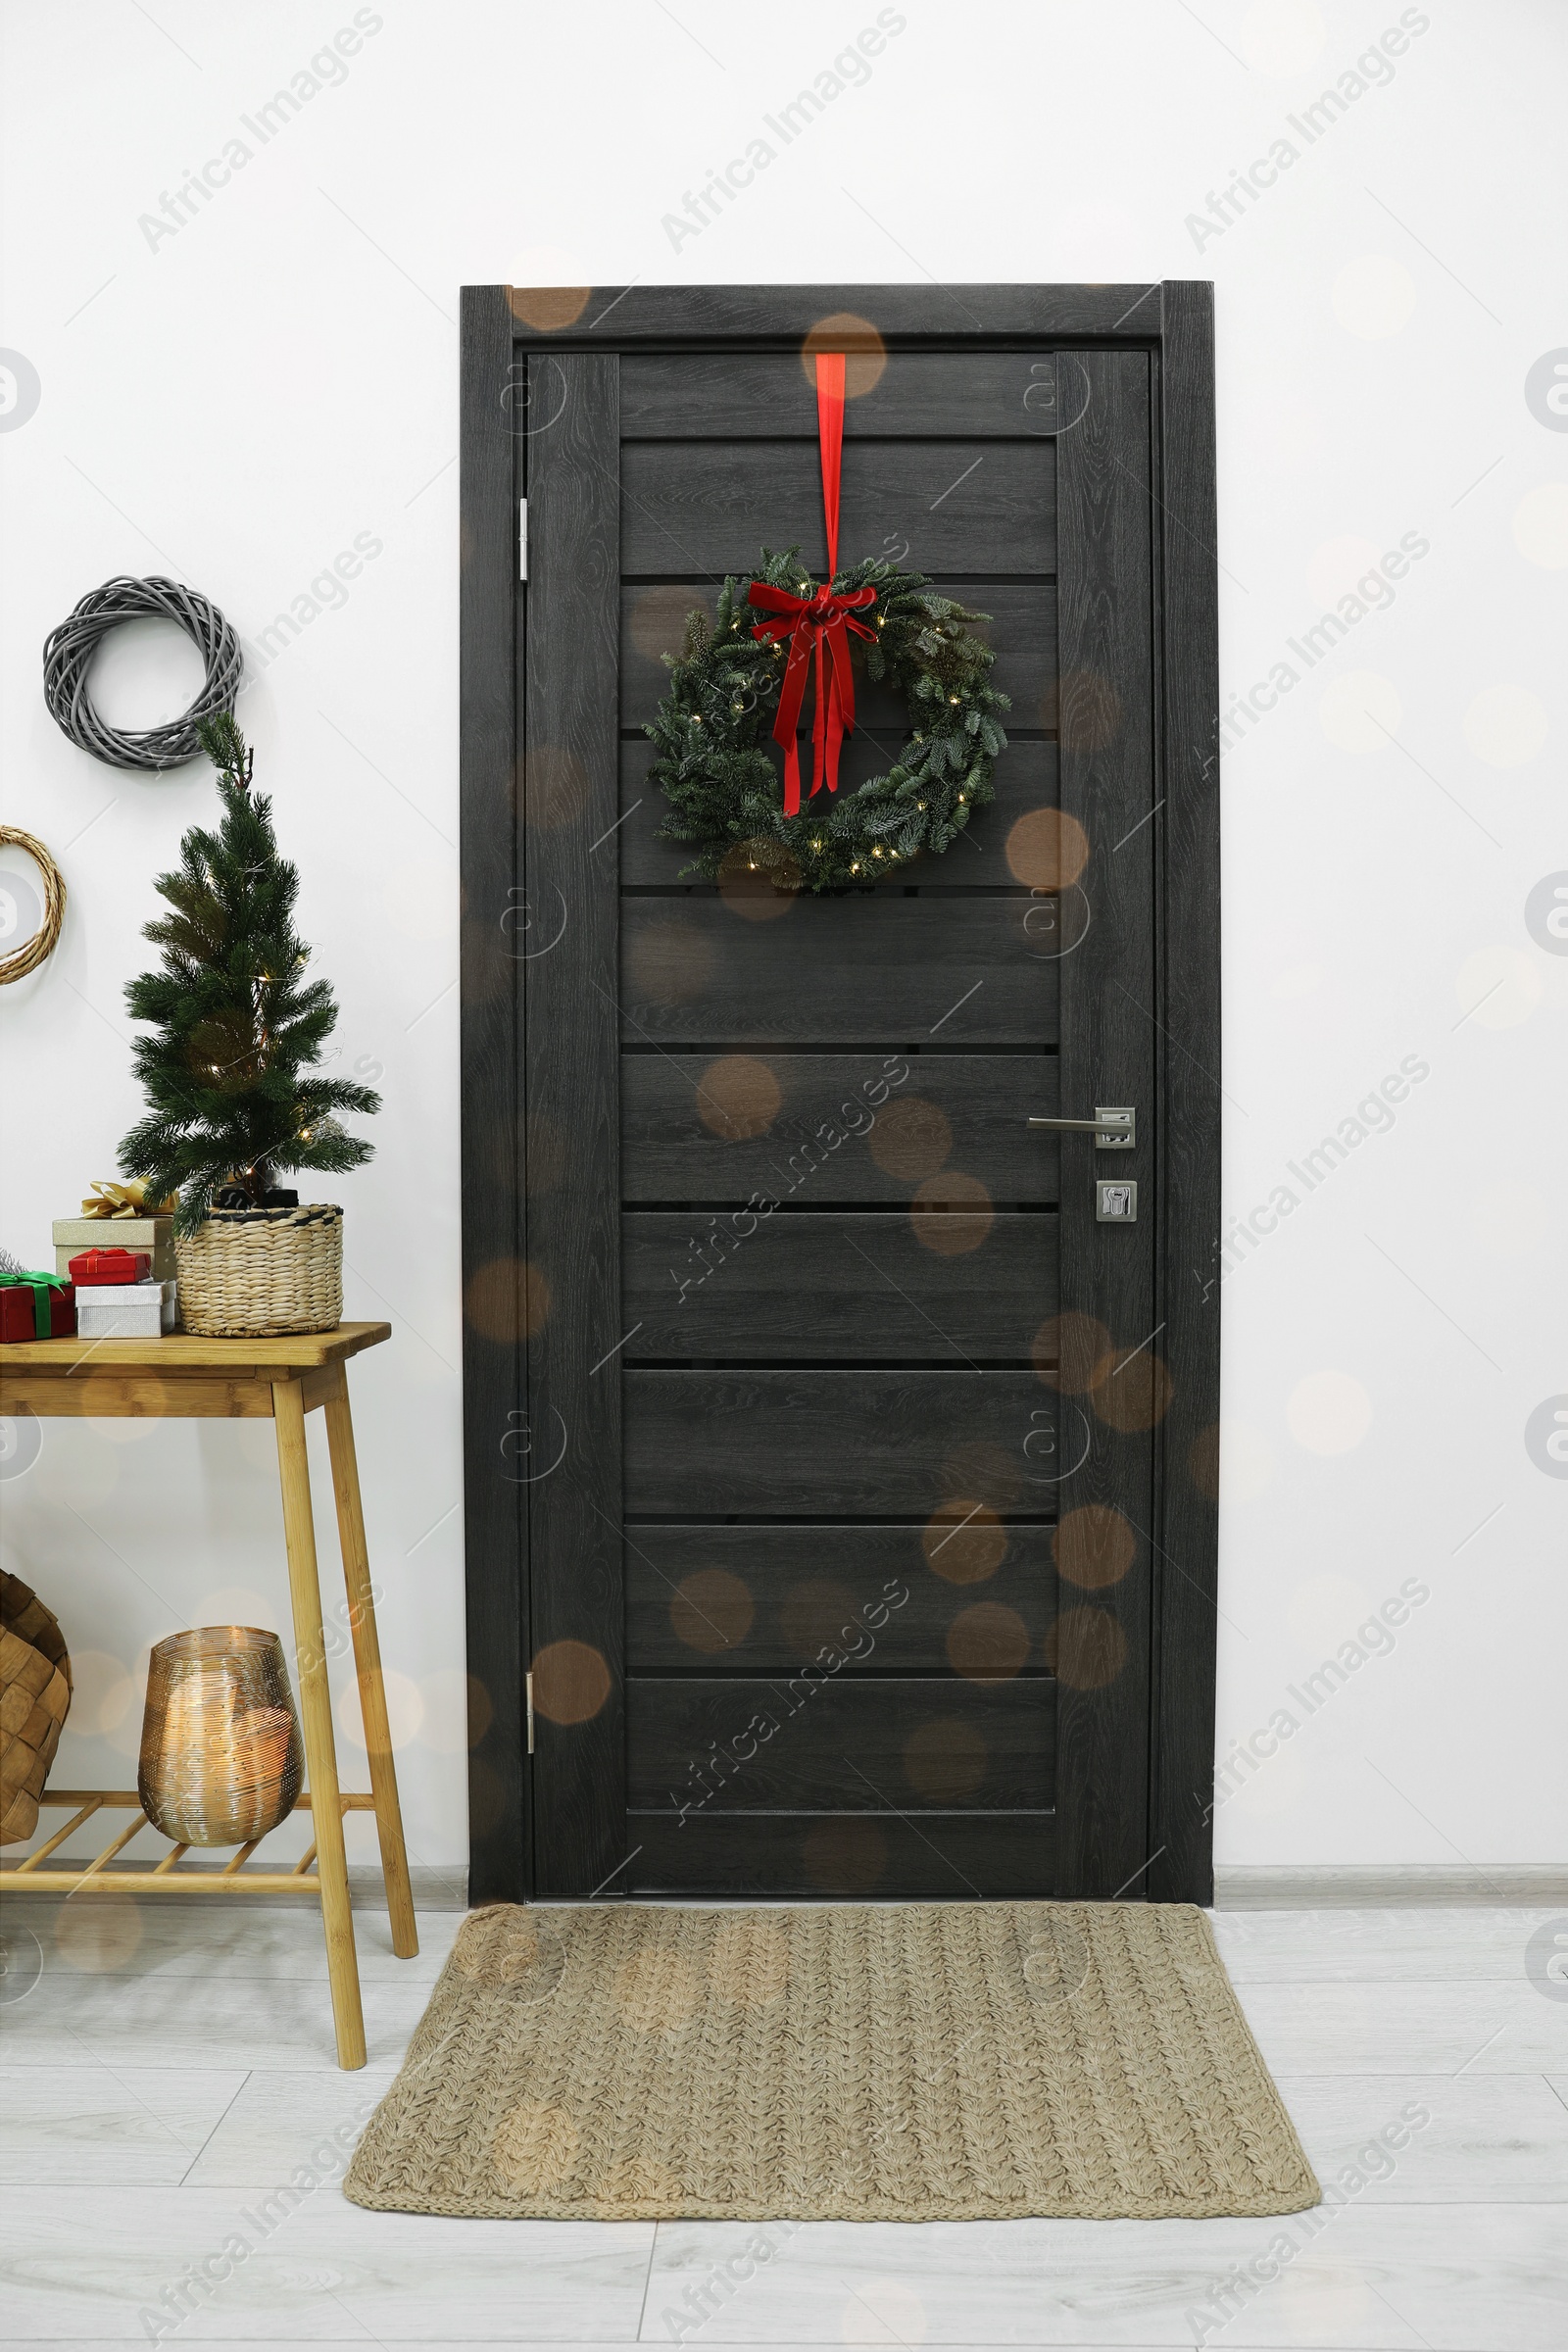 Photo of Beautiful Christmas wreath with red bow hanging on door and different festive decor indoors